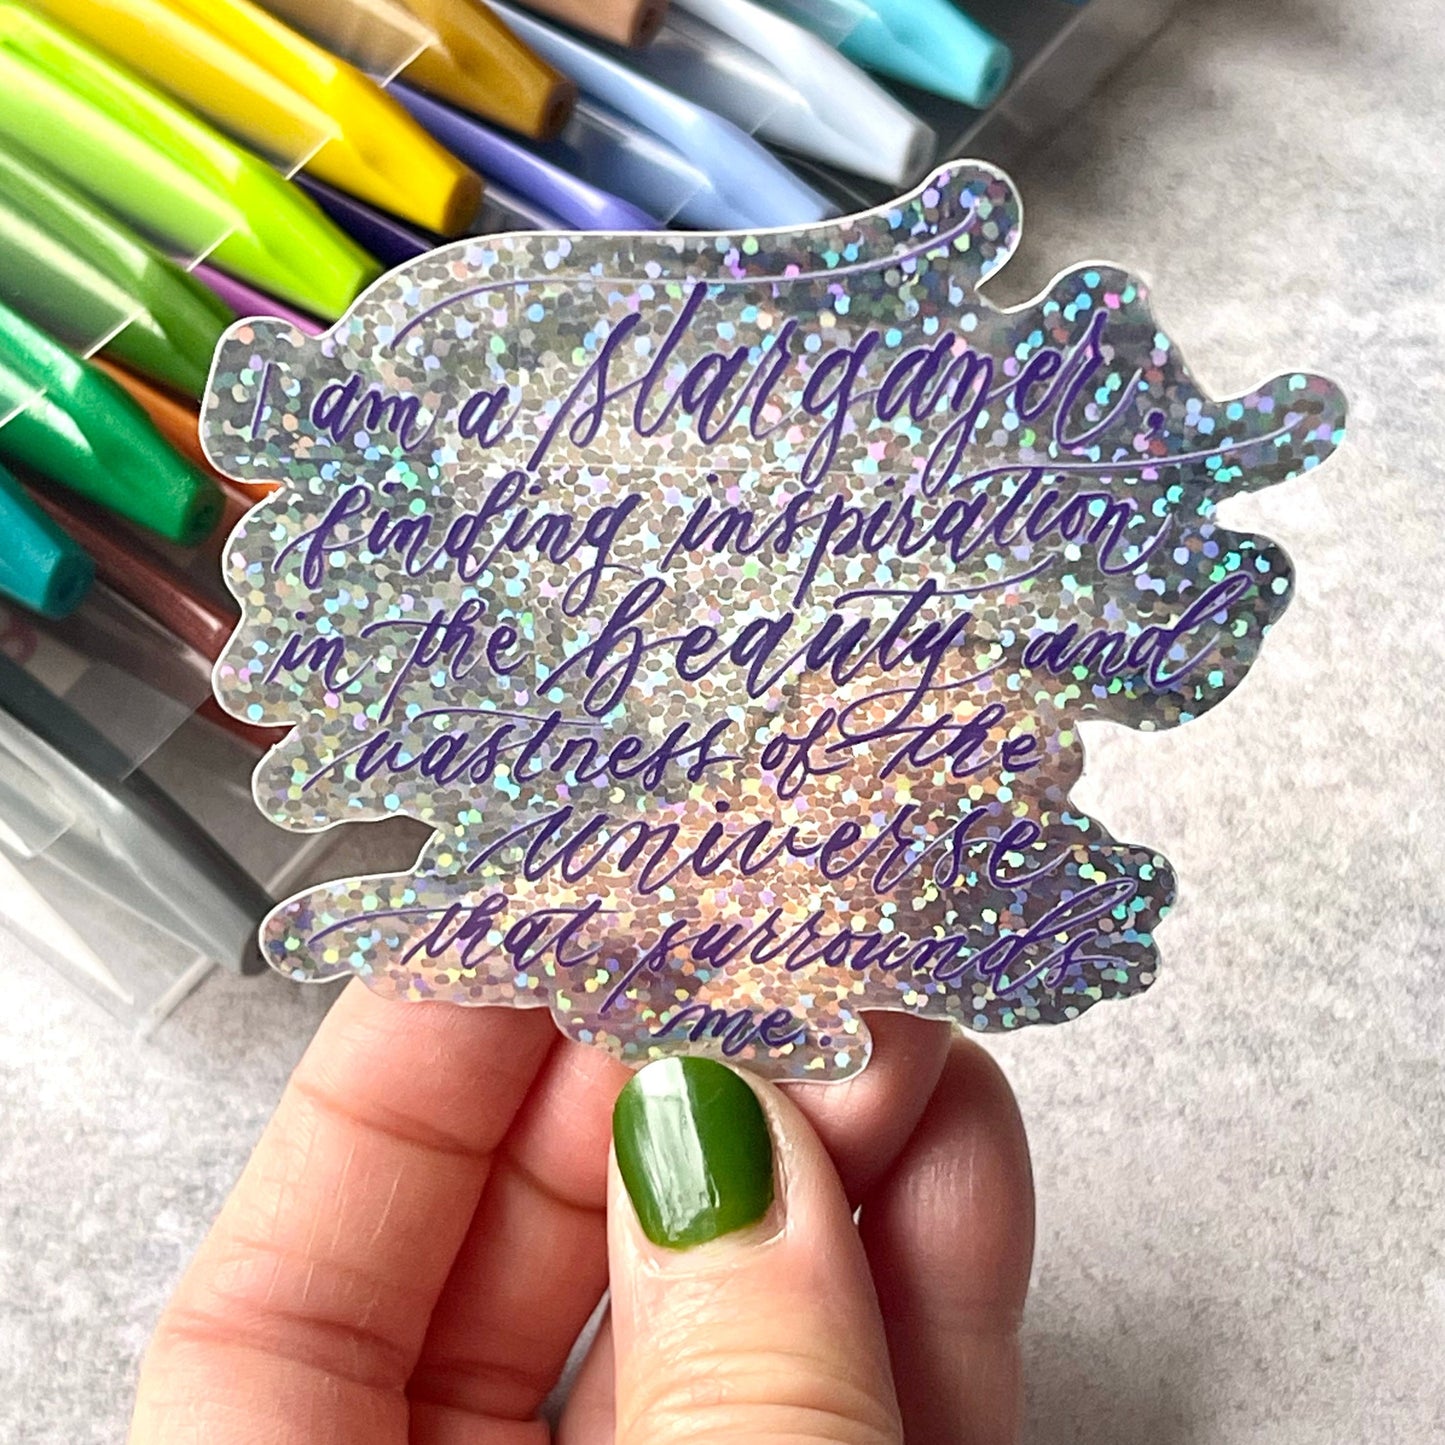 I am a stargazer finding inspiration in the beauty and vastness of the universe that surrounds me script calligraphy glitter sticker in shiny frontal view.